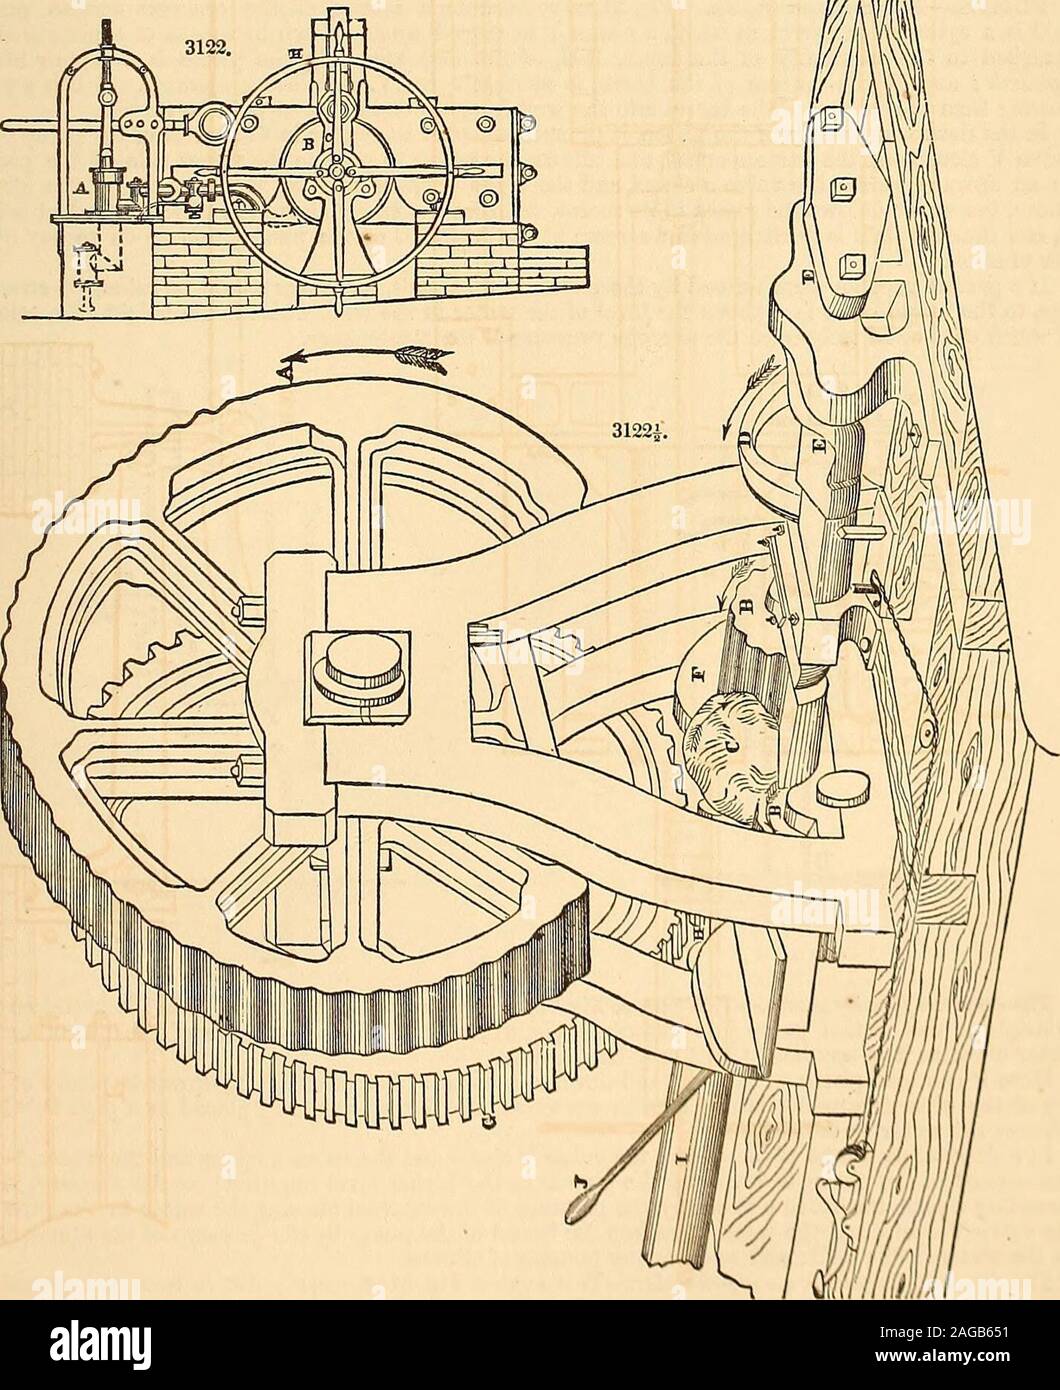 . Appleton's dictionary of machines, mechanics, engine-work, and engineering. B, hydrostatic cylinder. C C, wrought-iron cross-heada. D D, wrought-iron bars, connecting cross,heads C C. F, granite sills. H, screw-wheel, for forcing back the ram. E, Fig. 3120, compound levers, for ascertaining the strain: proportion, 1 to 200. Fig. 3122, section.. PUDDLERS BALLS, MACHINE FOR COMPRESSING, by J. P. Win-slow. Troy, N. Y. In Fig.3122^, A is the rotating cam-formed compressor. B B, two cylindrical bod rollers. 0, loop or bill of iron,resting upon and between the two bed-rollers in position for being Stock Photo